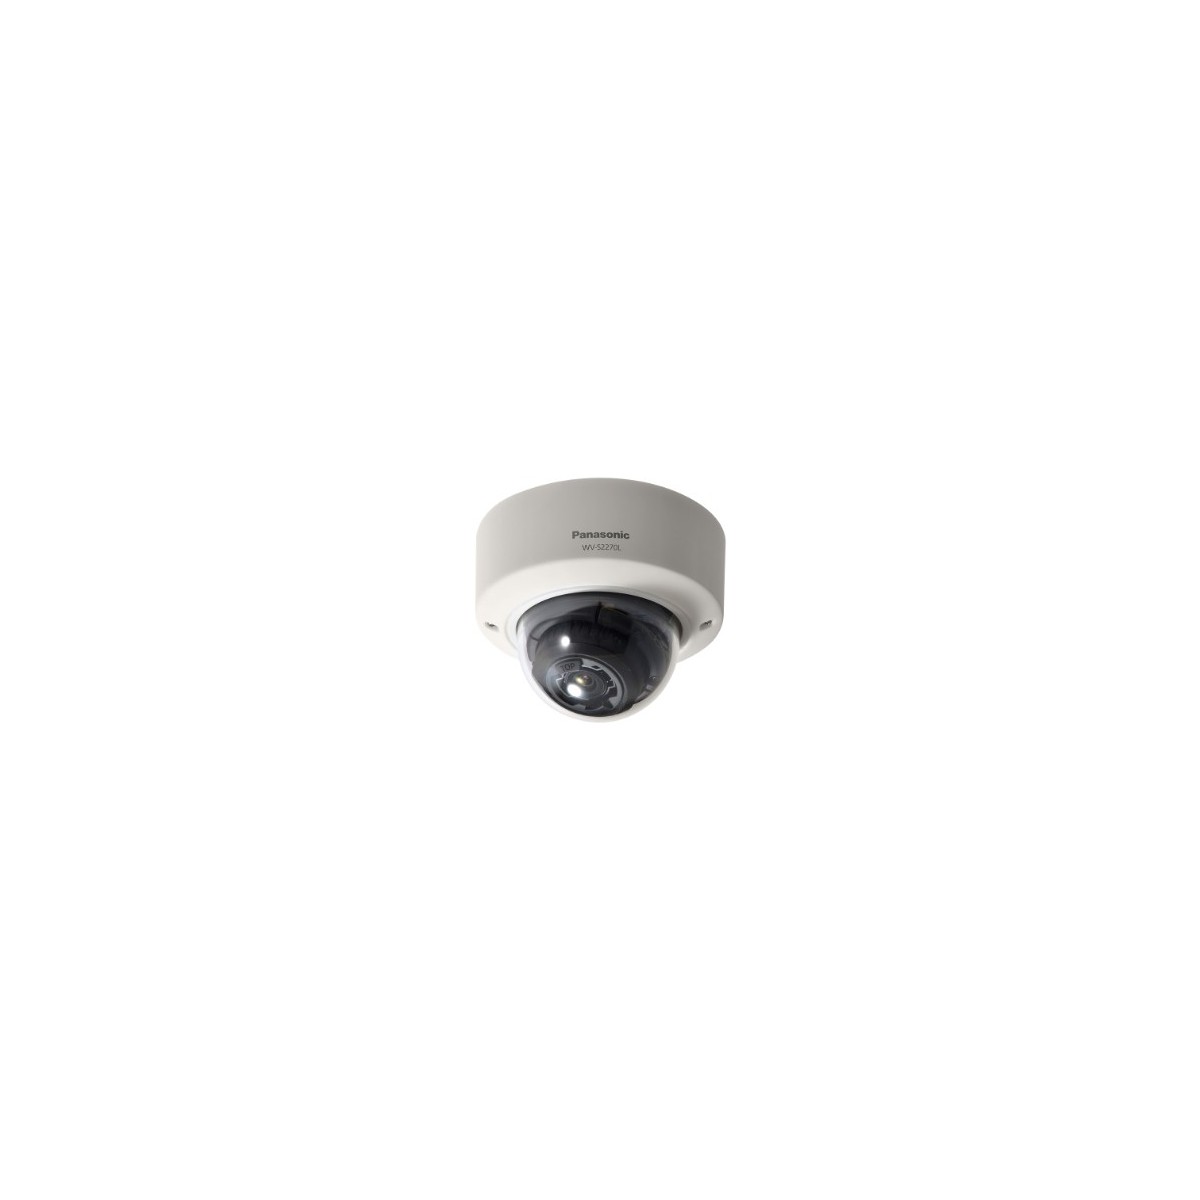 Panasonic WV-S2270L - IP security camera - Indoor - Wired - Simplified Chinese - German - English - Spanish - French - Italian -